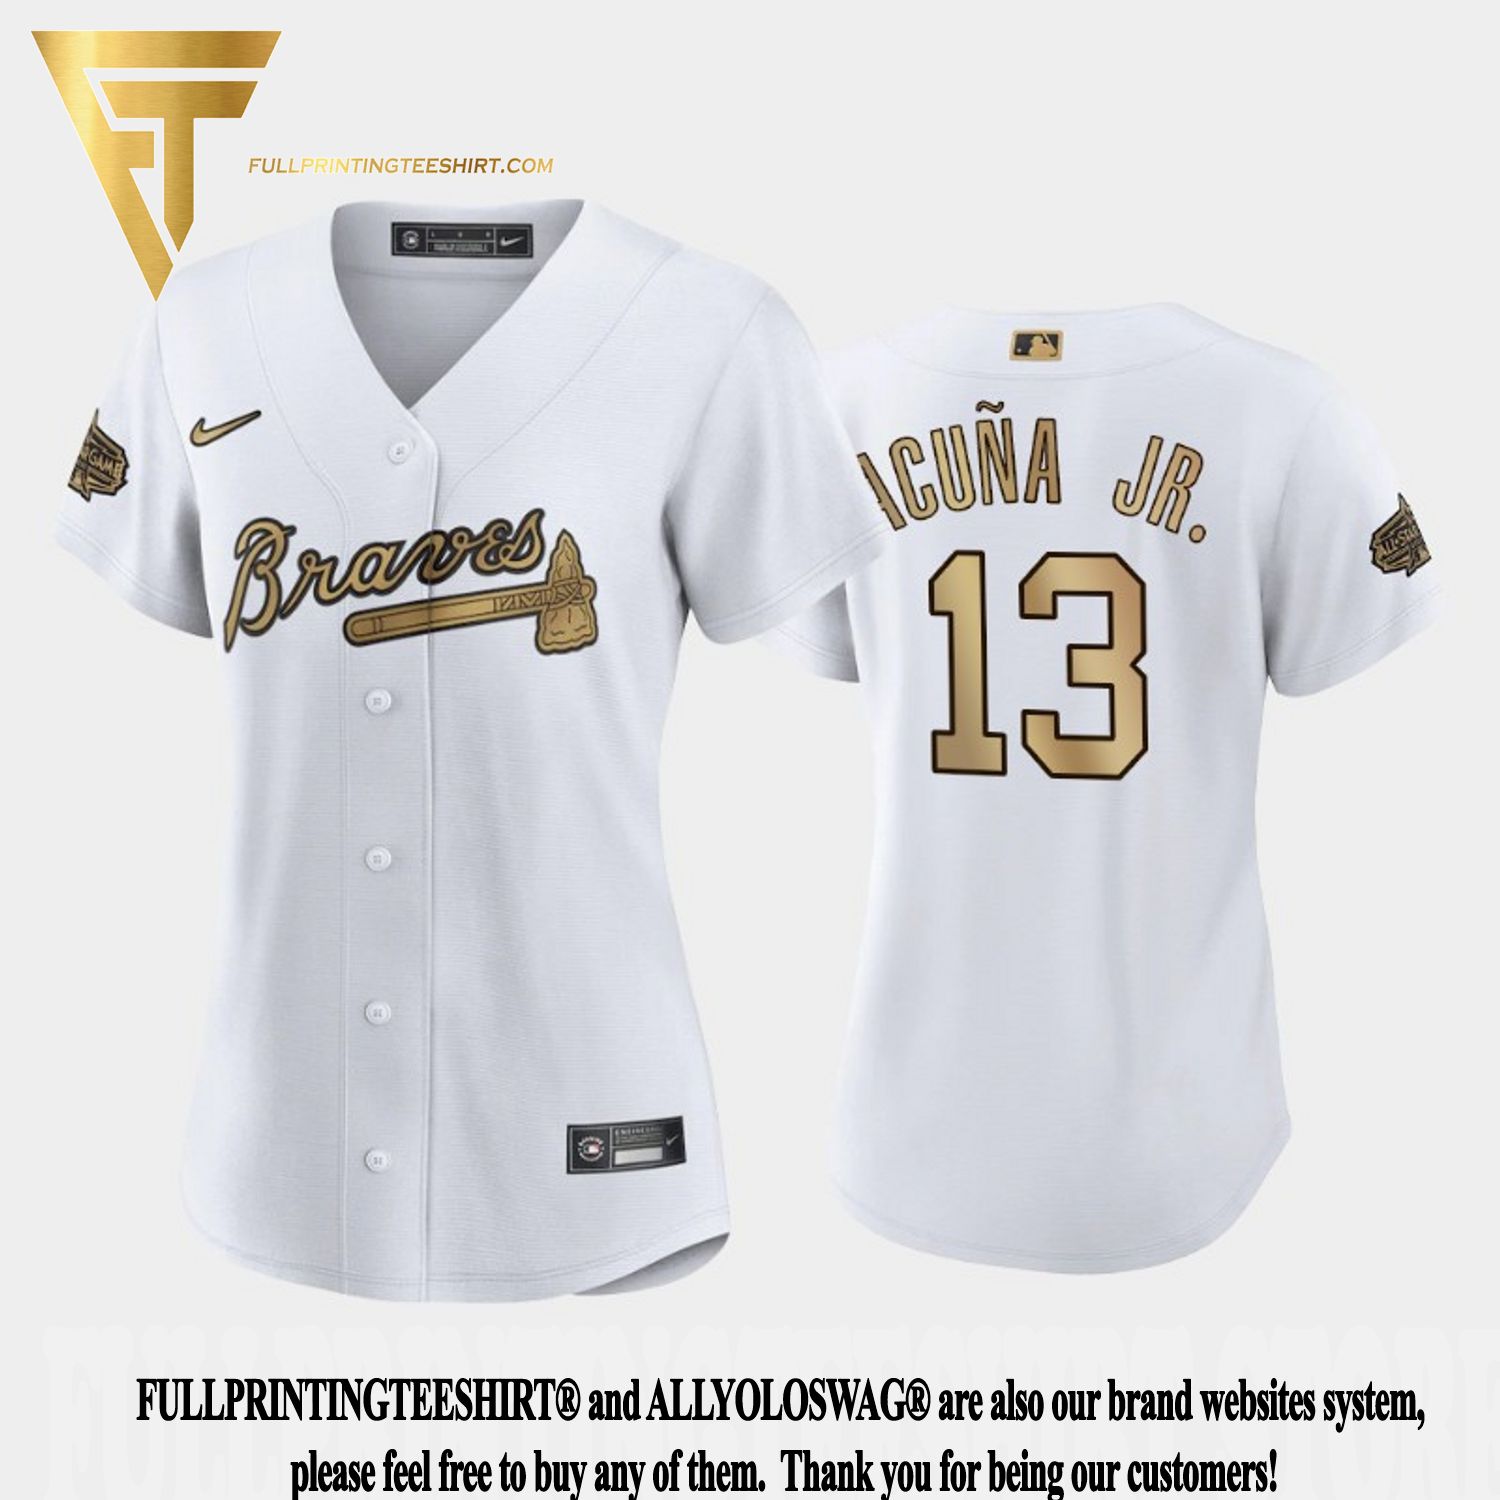 black and gold acuna jersey